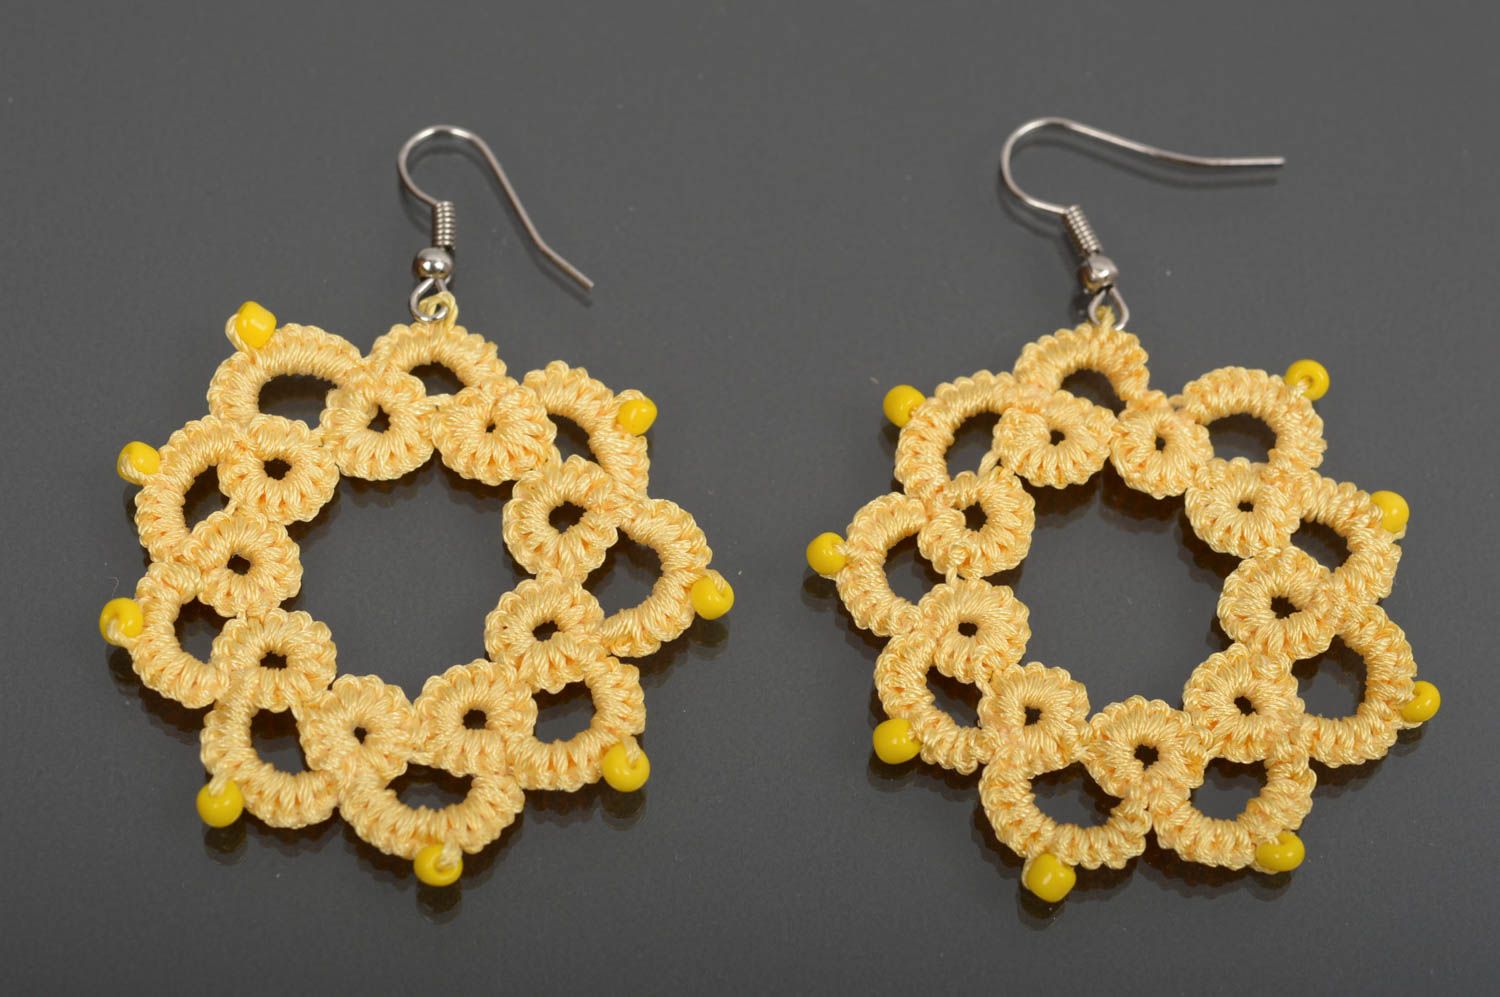 Unusual handmade woven thread earrings textile jewelry designs gifts for her photo 1